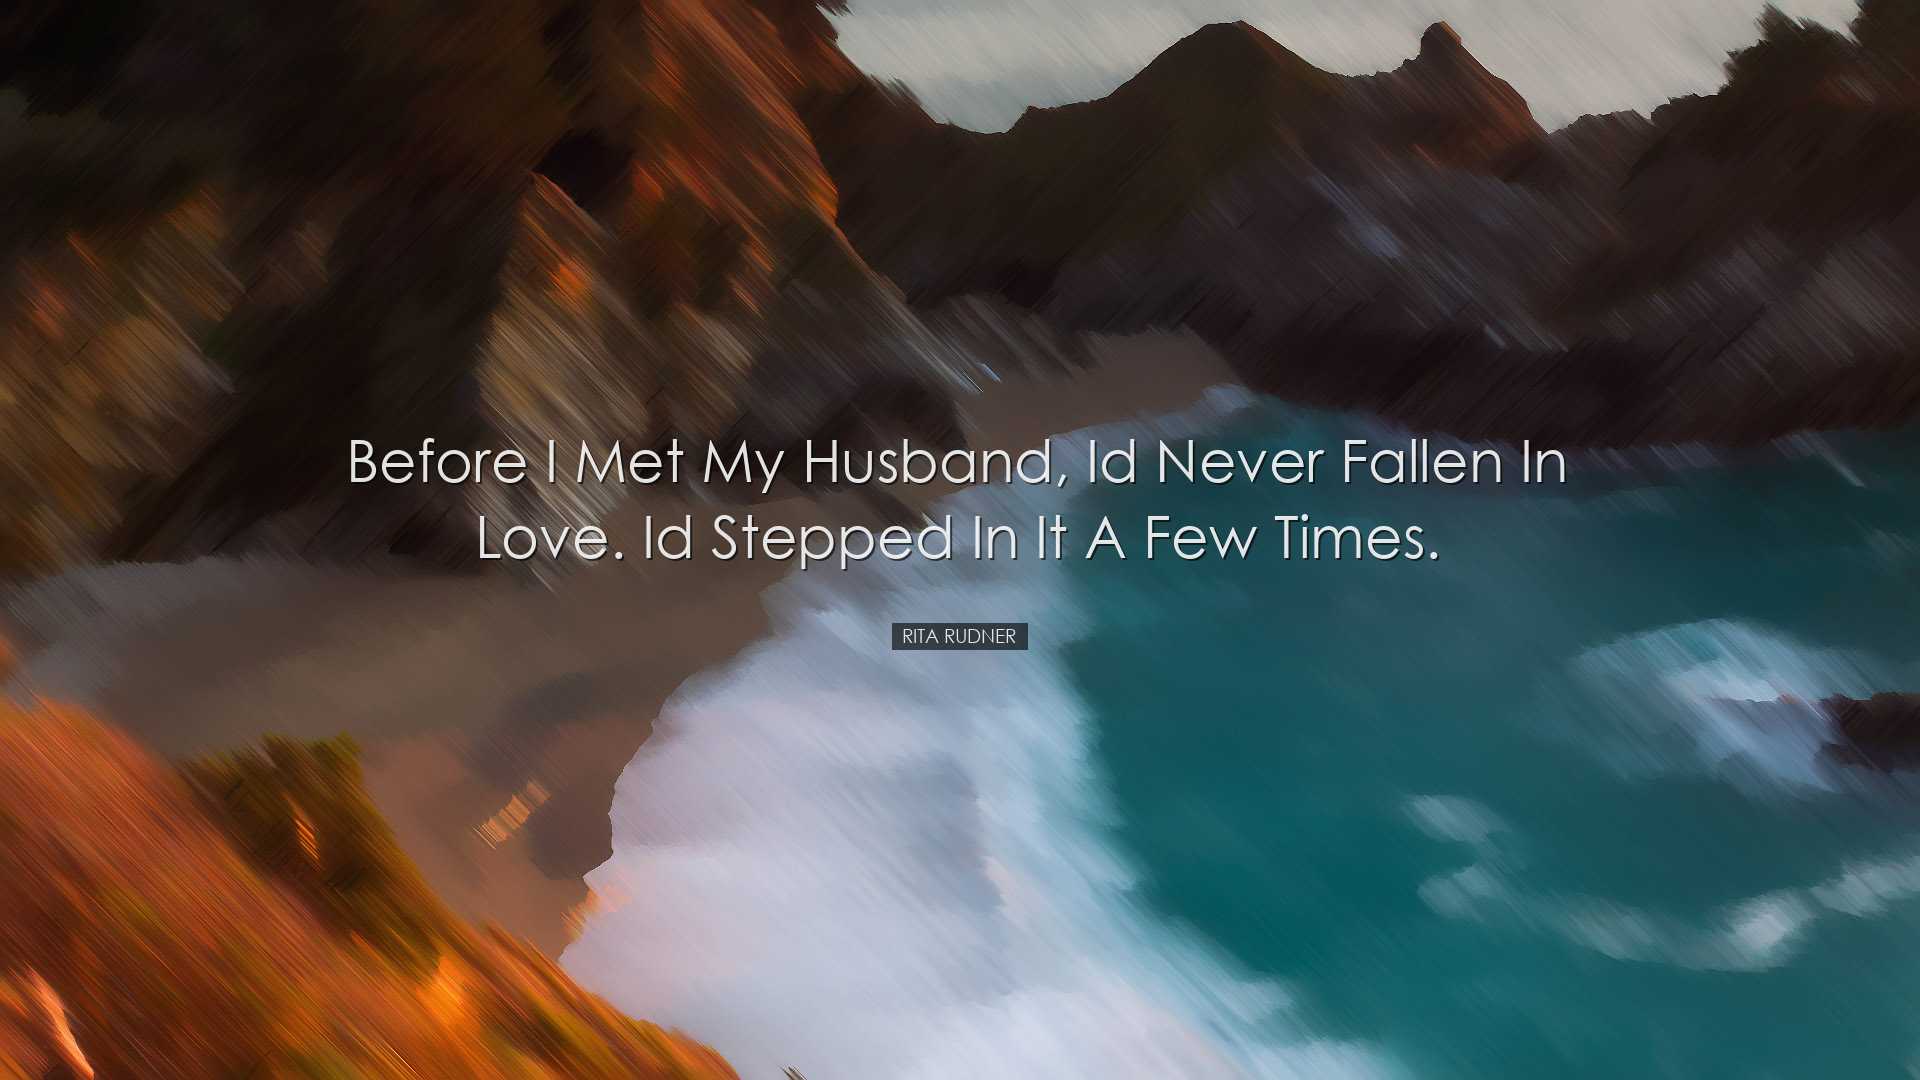 Before I met my husband, Id never fallen in love. Id stepped in it